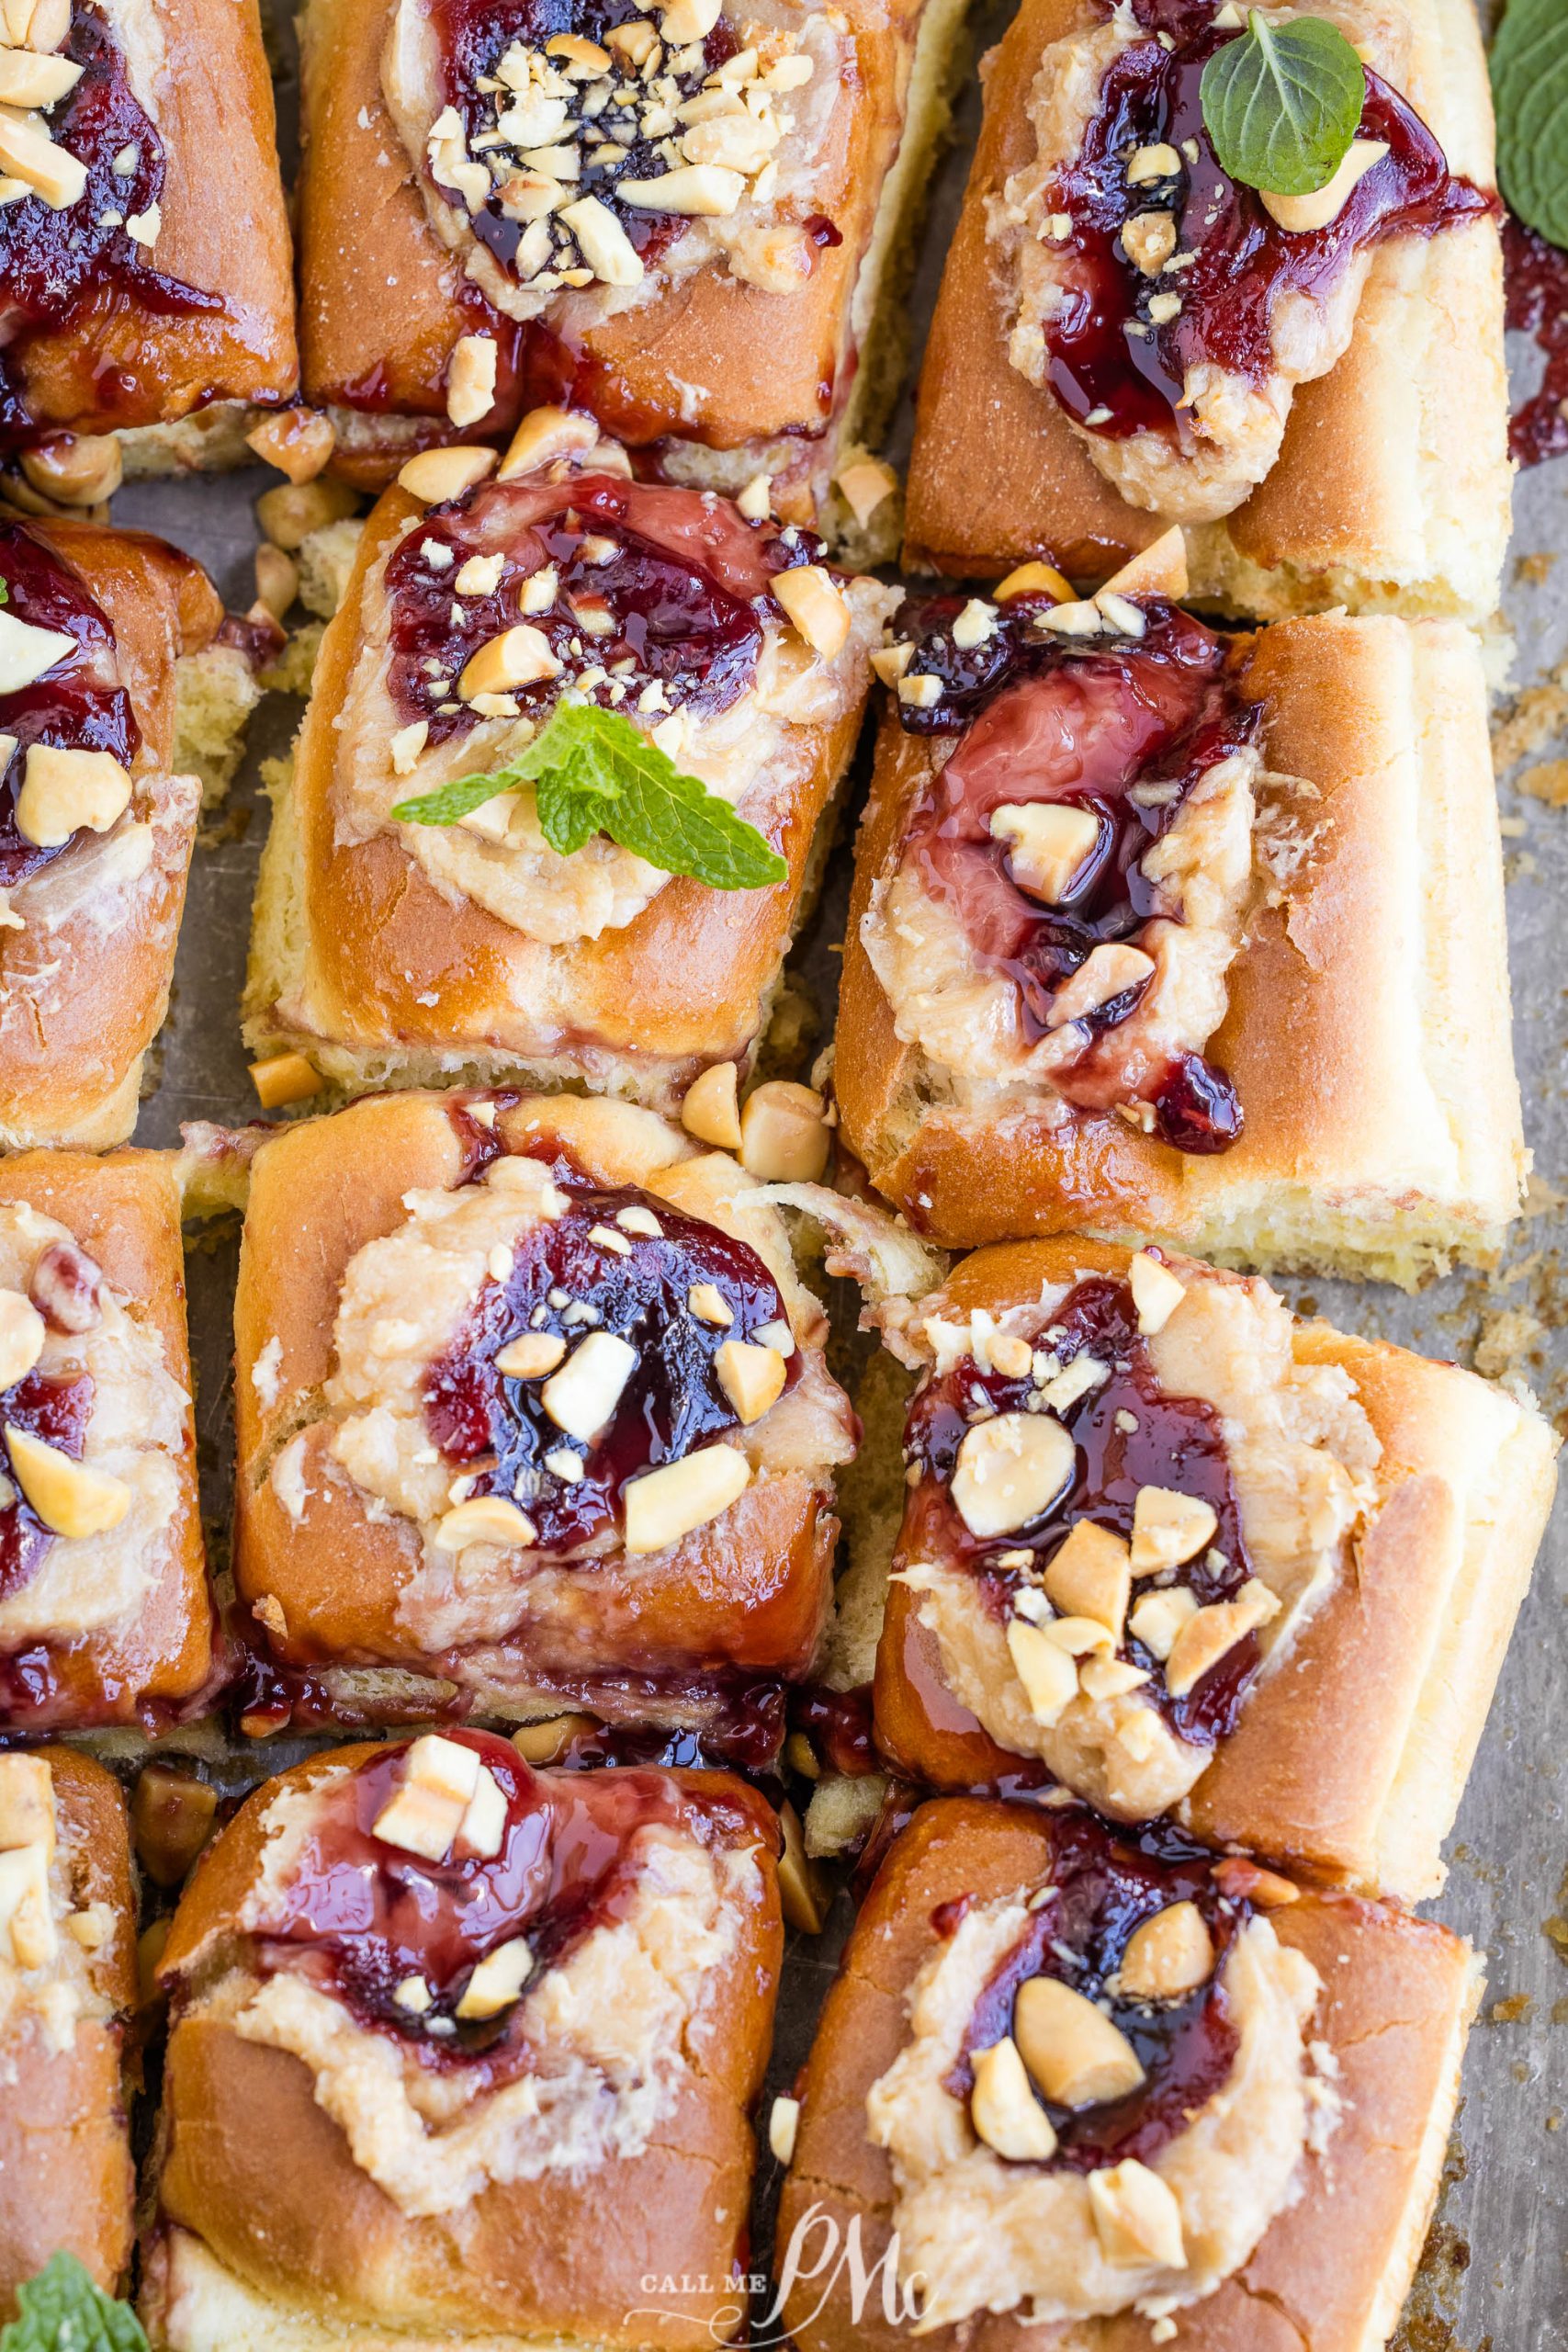 A tray of freshly baked Peanut Butter and Jelly Hawaiian Roll Cheese Danish topped with peanuts.